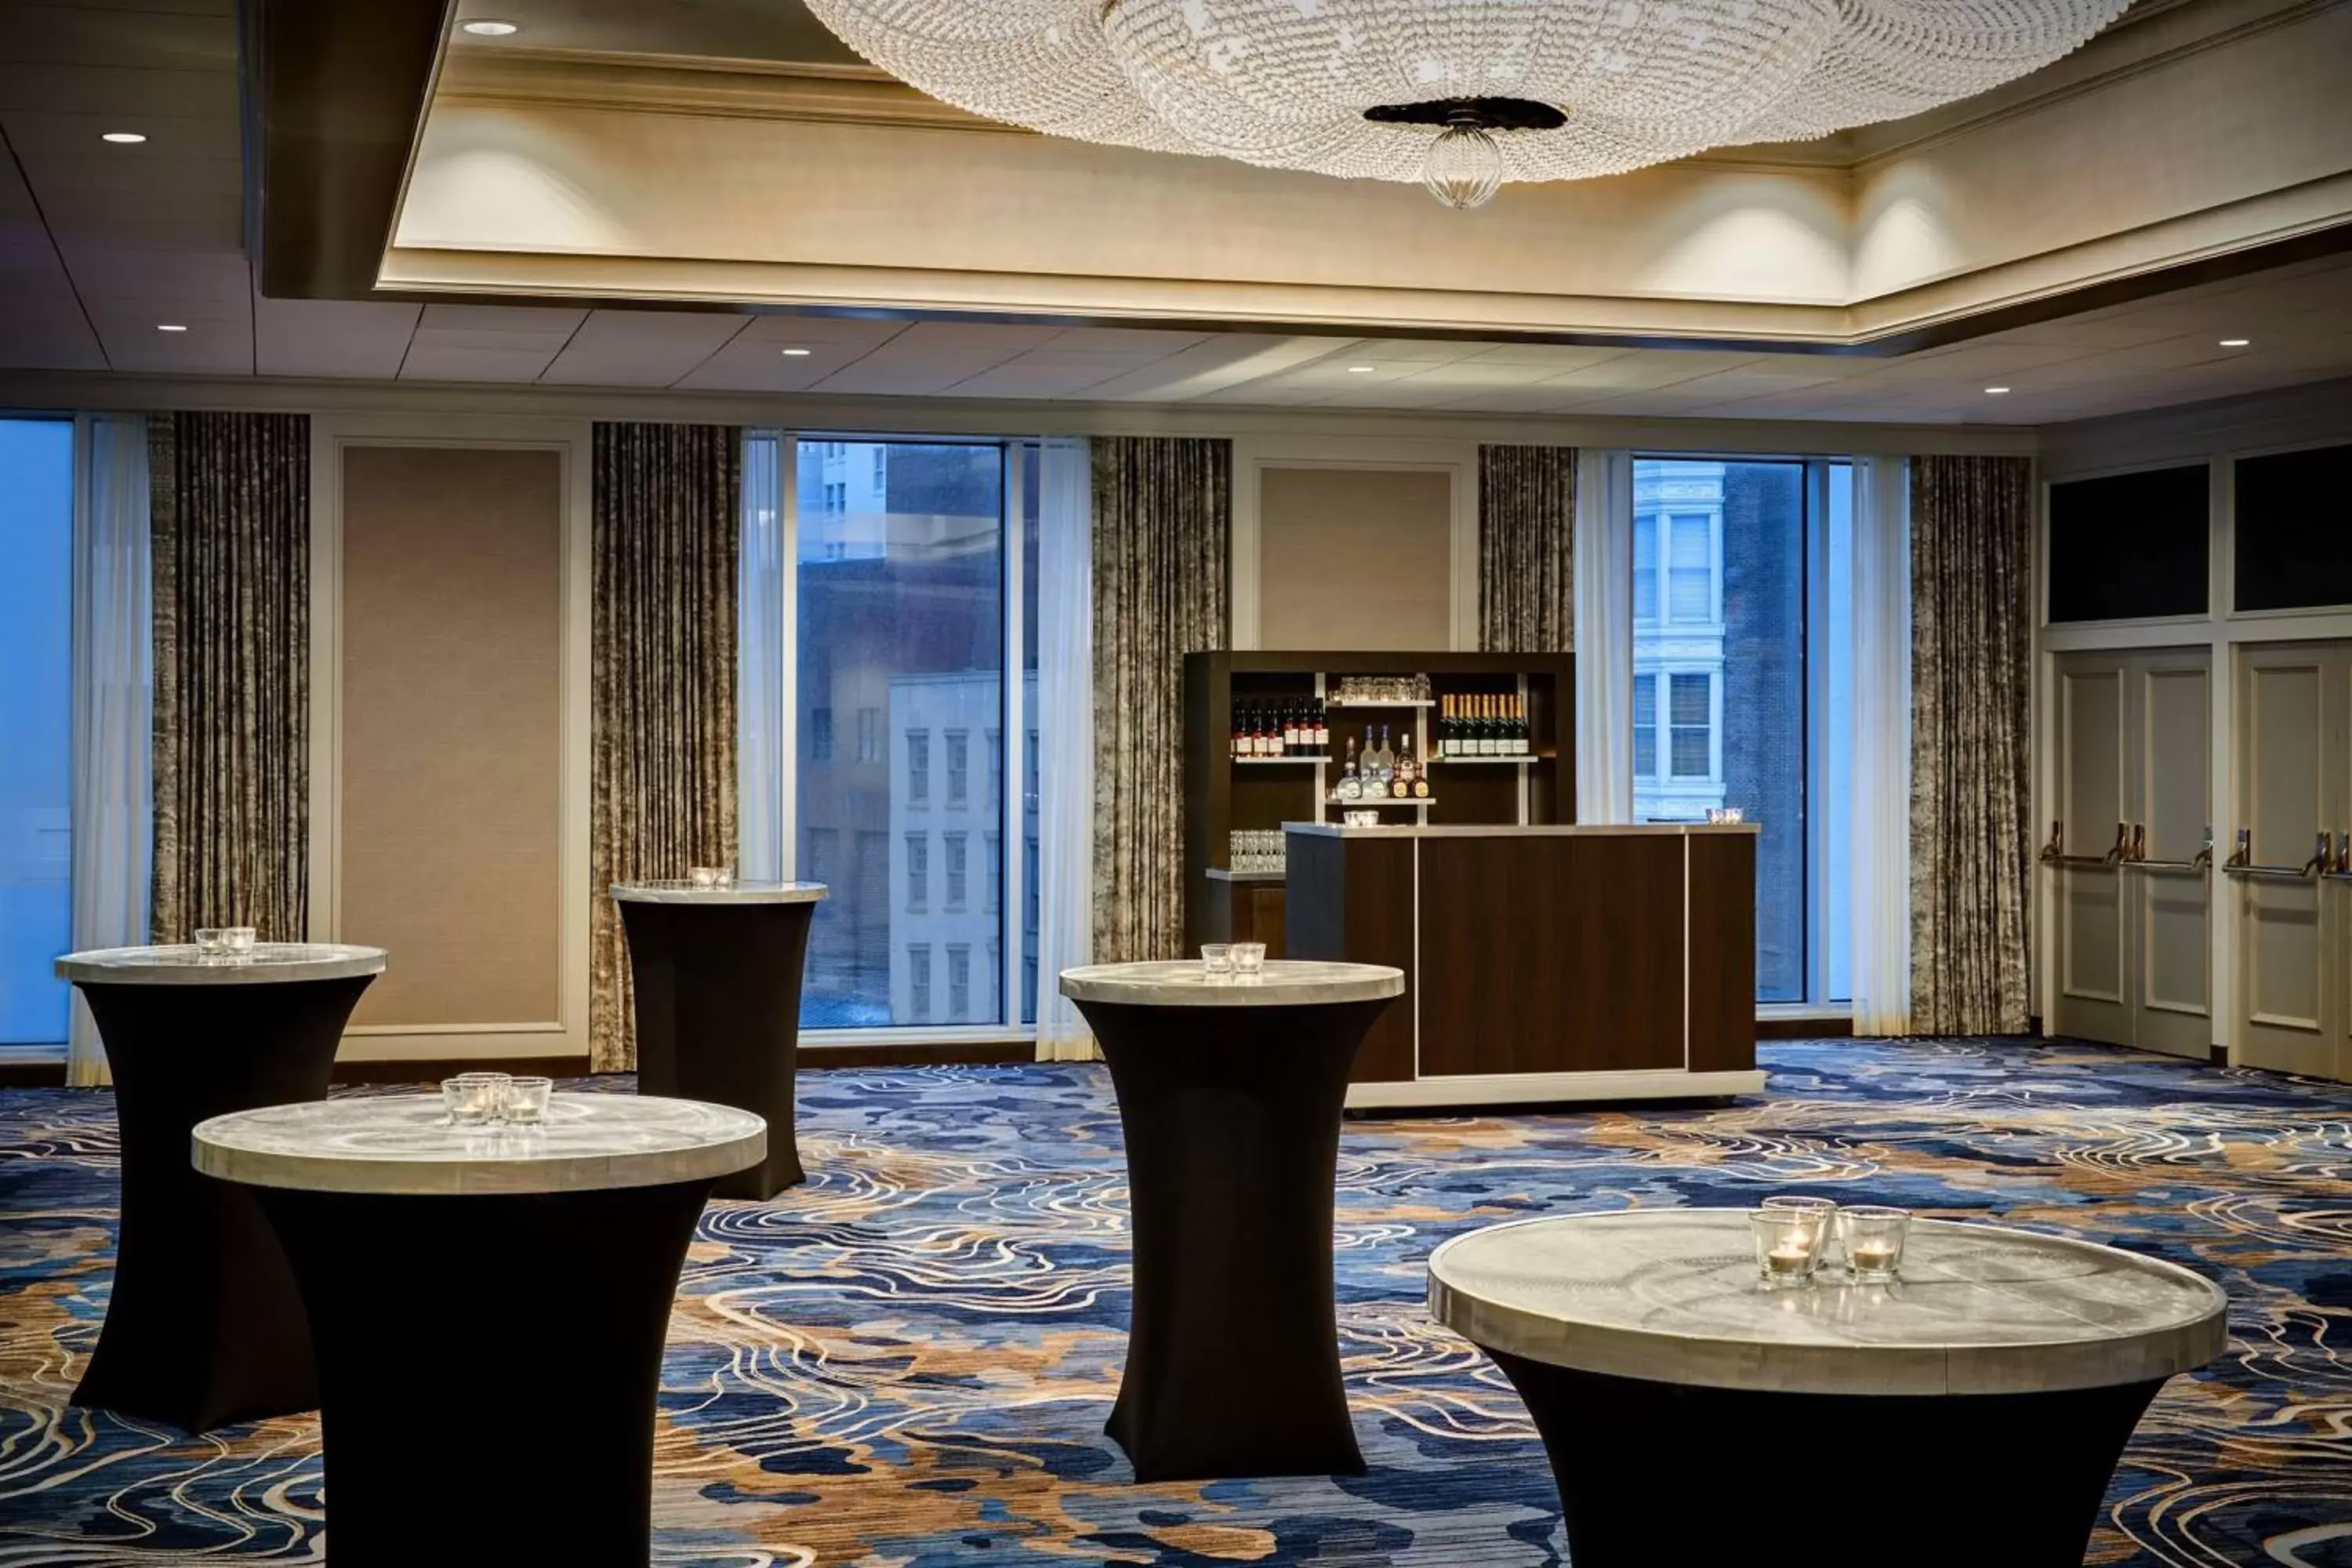 Meeting/conference room in New Orleans Marriott